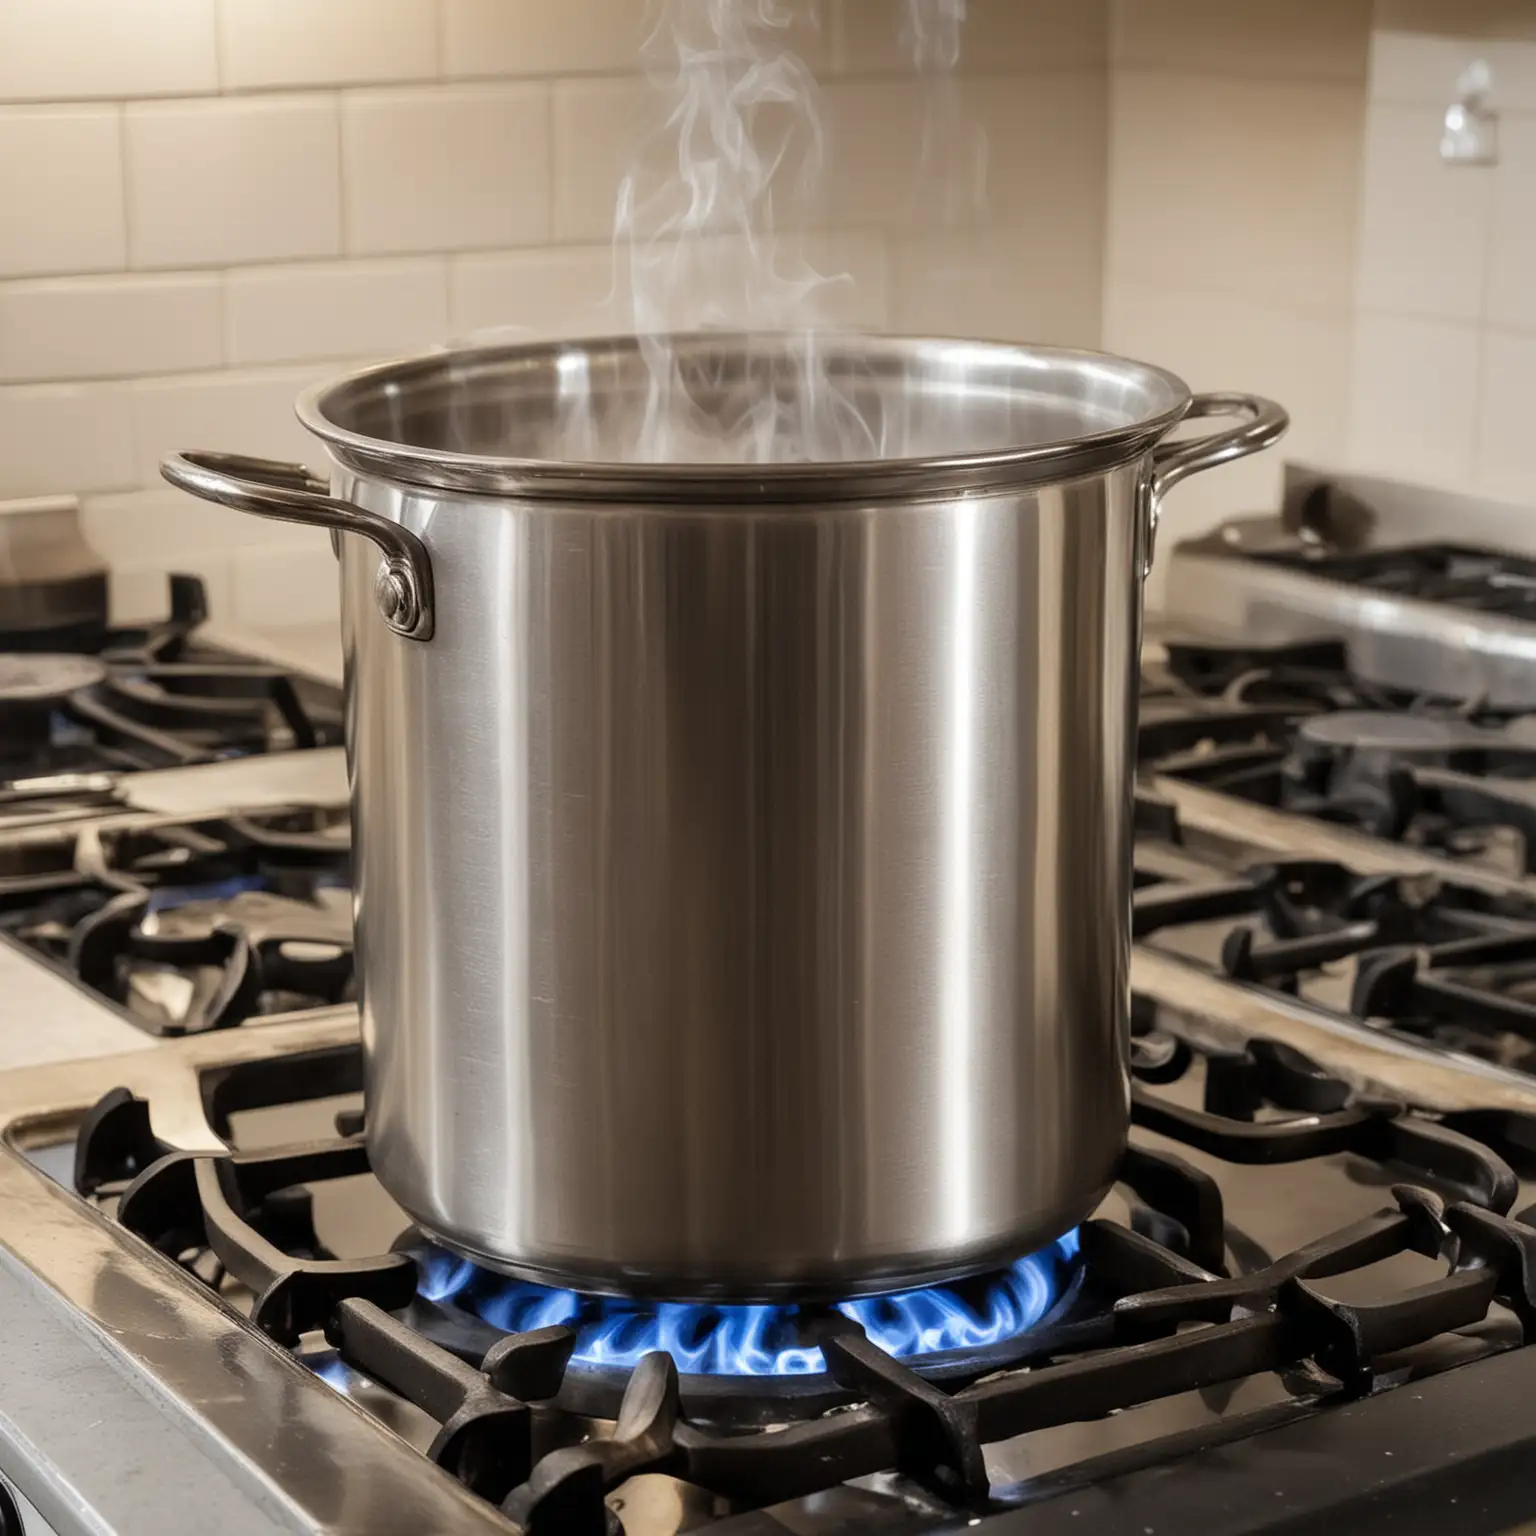 Very tall stainless steel pot, gas flame under pot on stove, with steam coming up